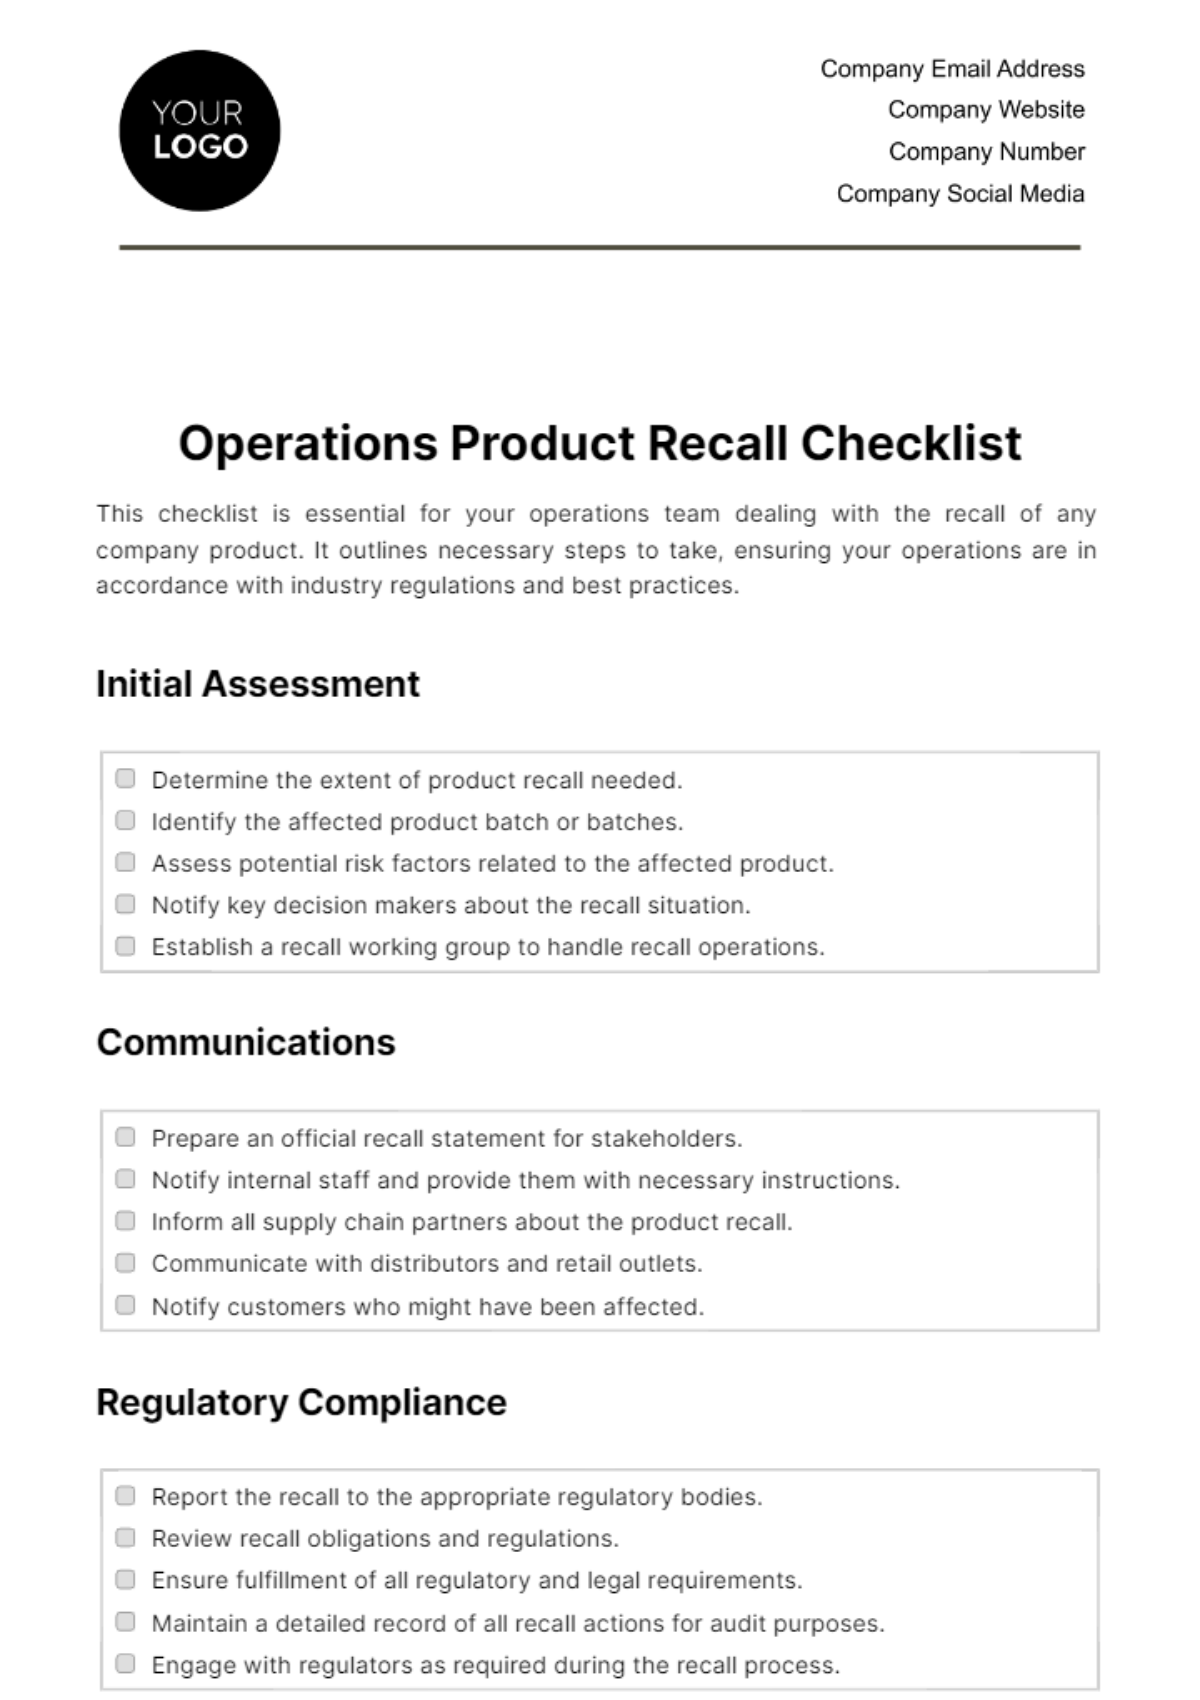 Free Operations Product Recall Checklist Template